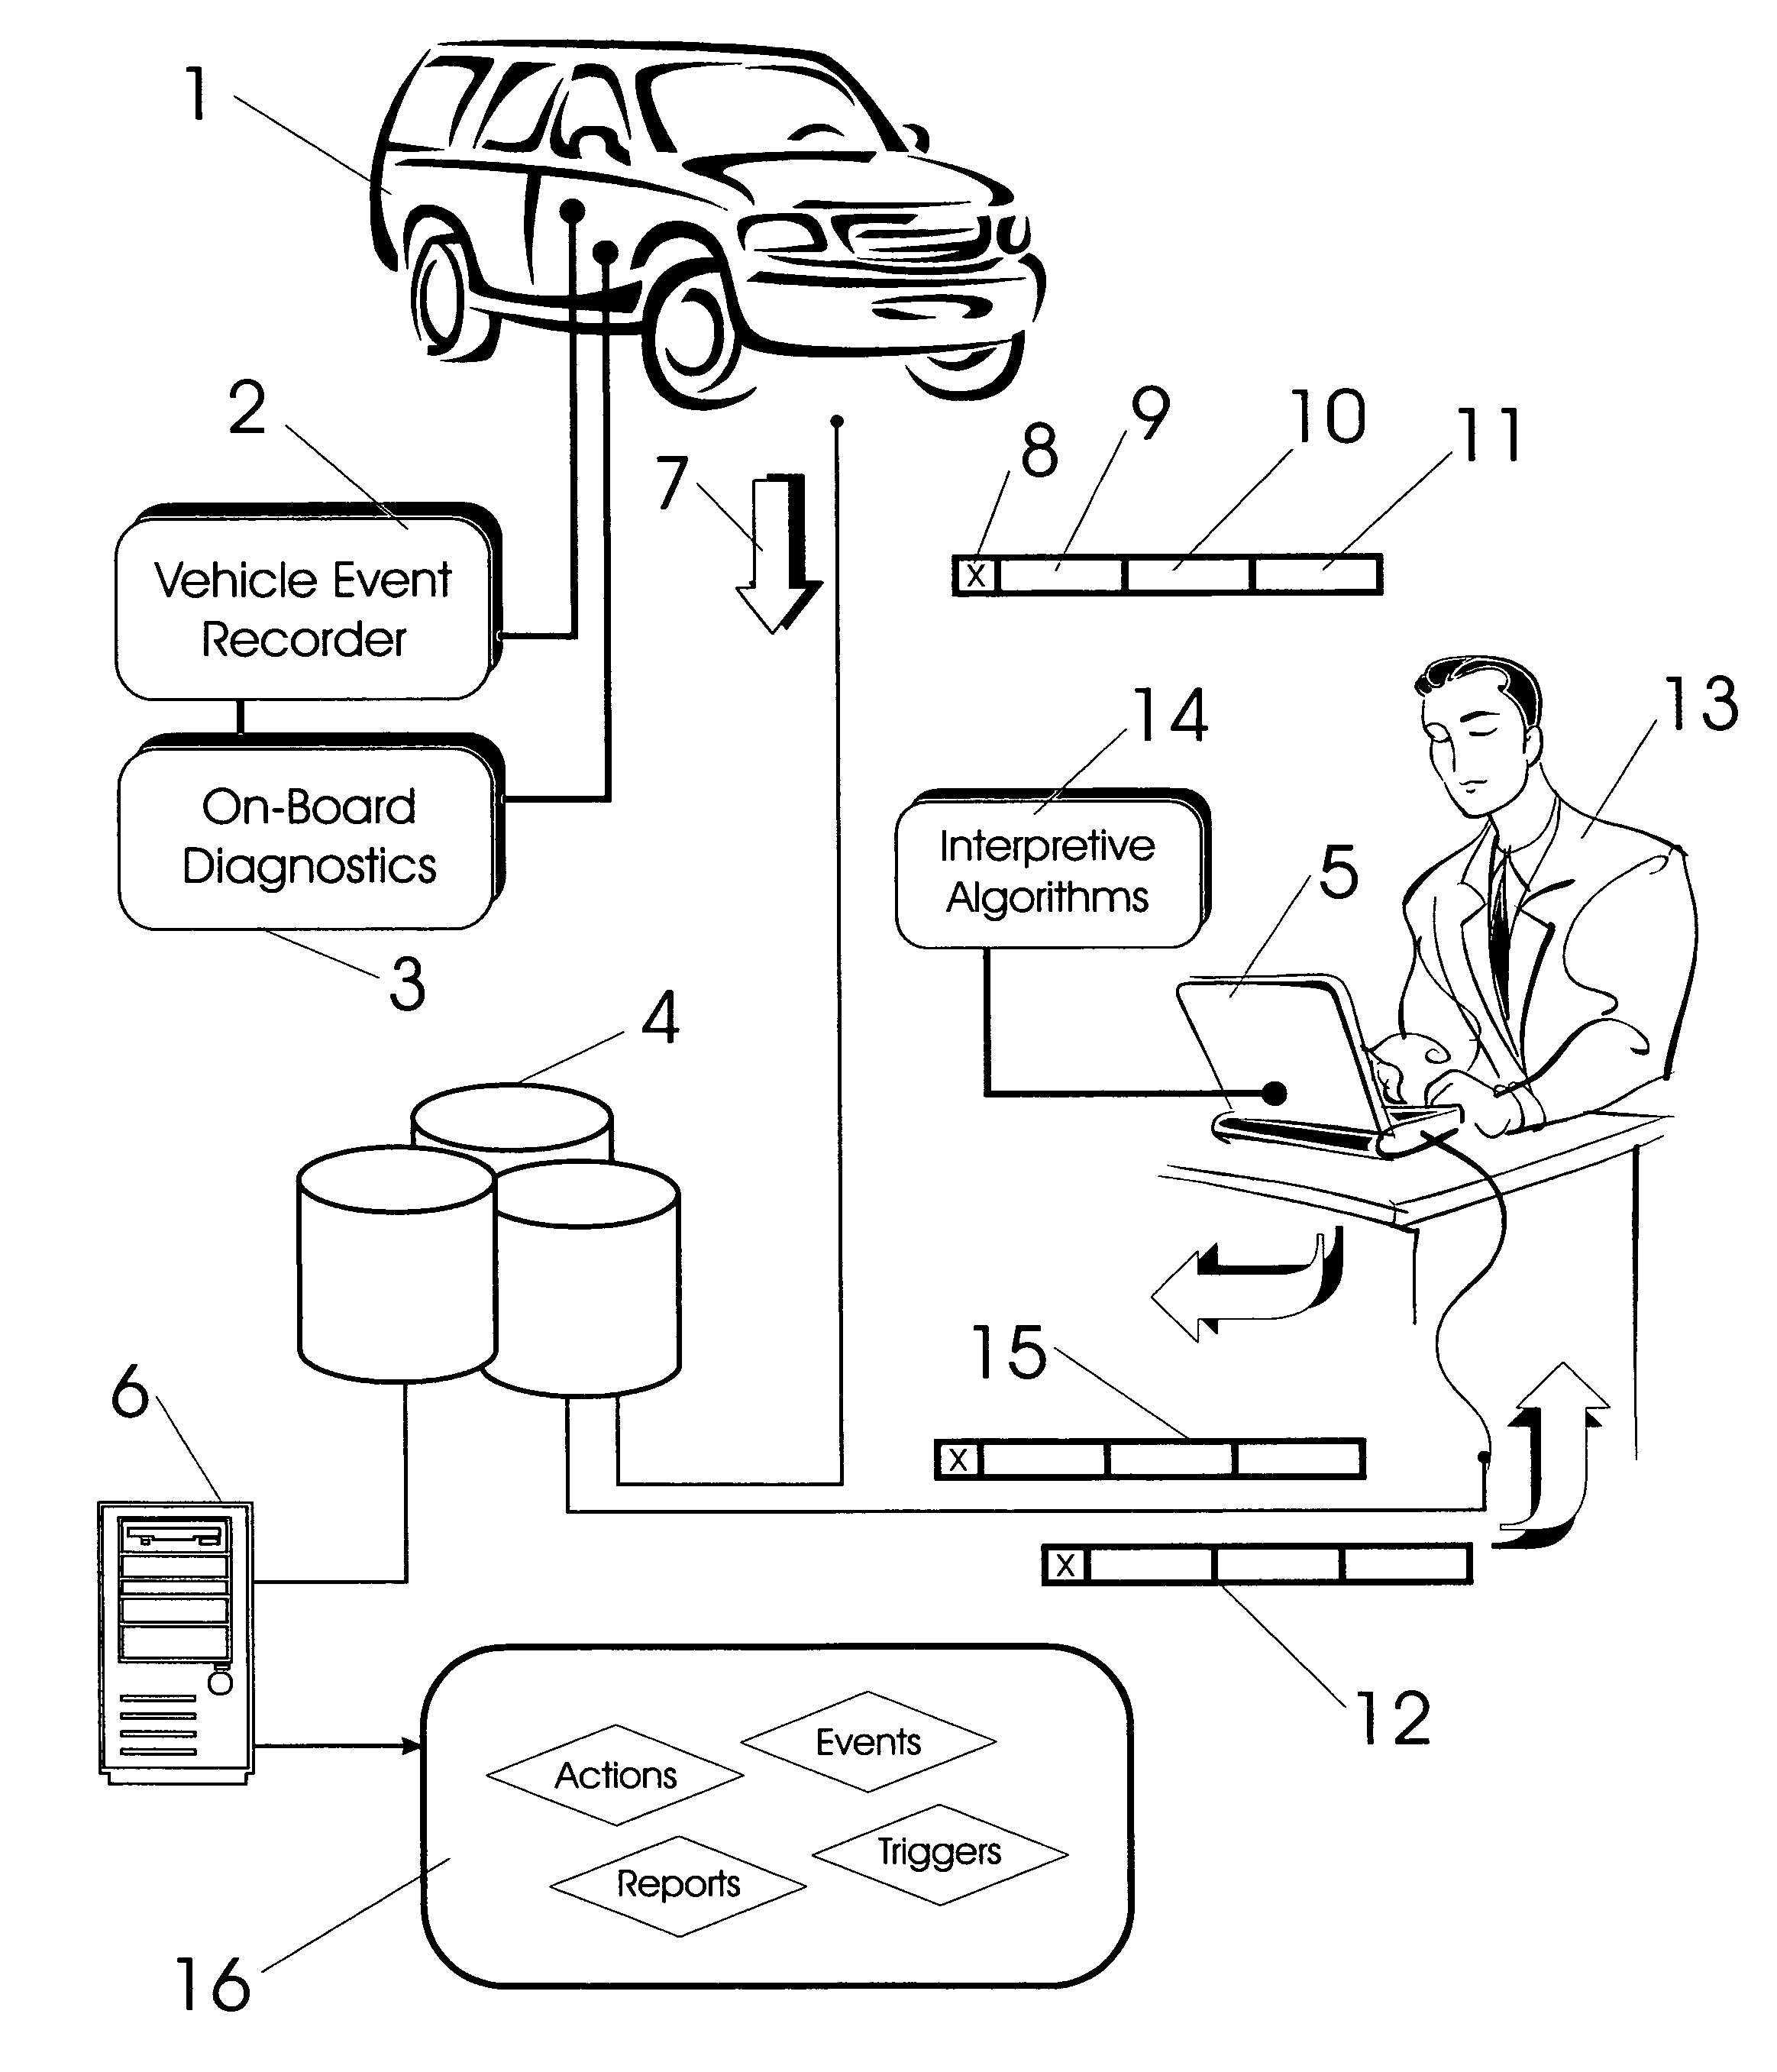 Discretization facilities for vehicle event data recorders